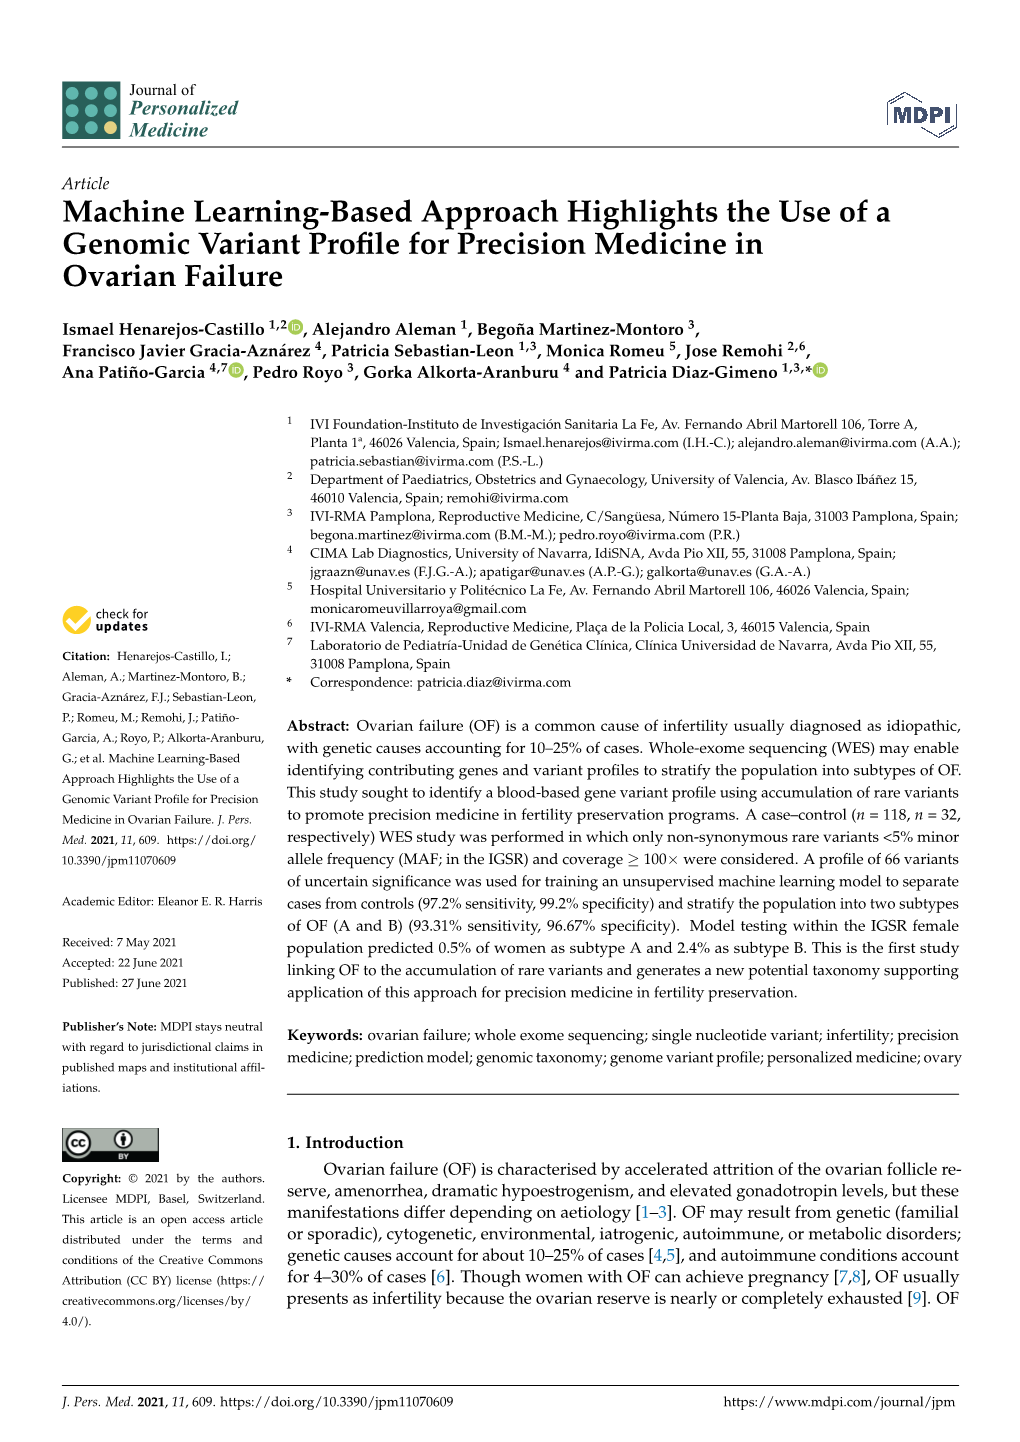 Machine Learning-Based Approach Highlights the Use of a Genomic Variant Proﬁle for Precision Medicine in Ovarian Failure